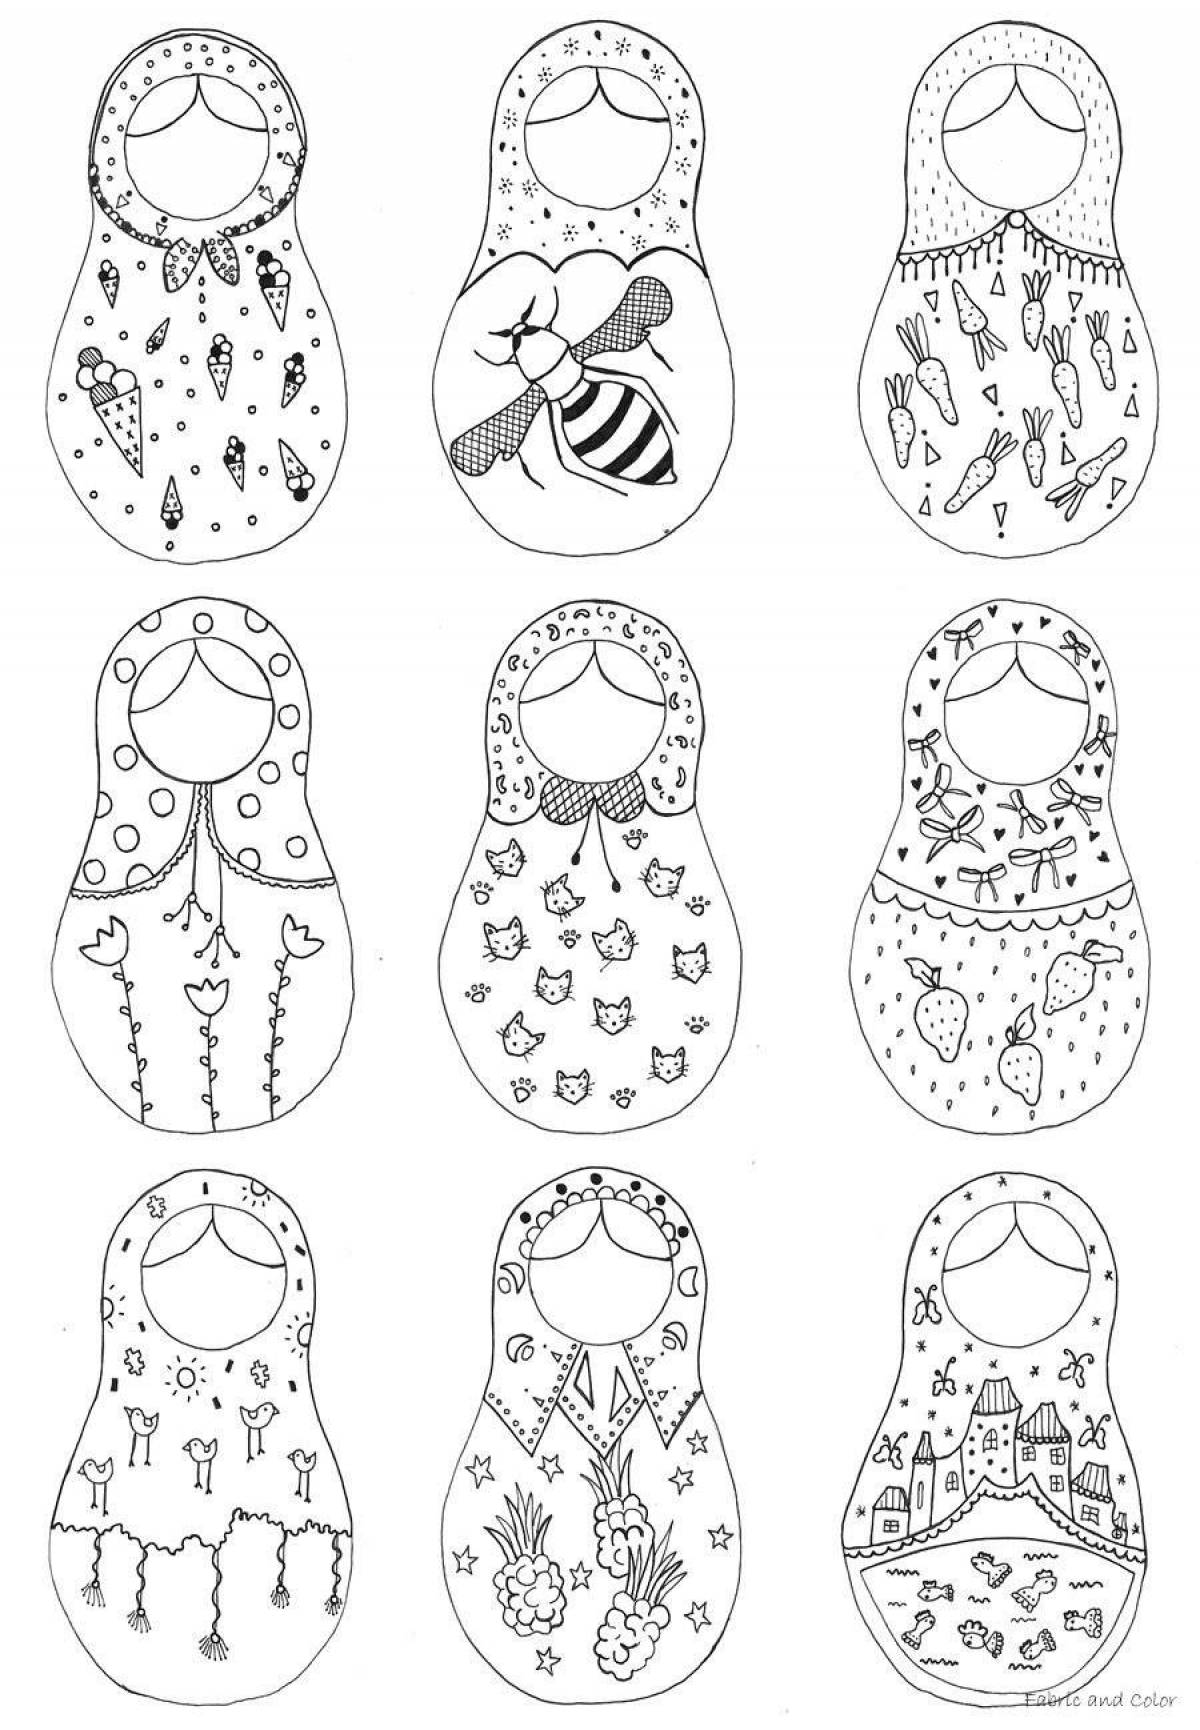 Intriguing coloring page with matryoshka pattern